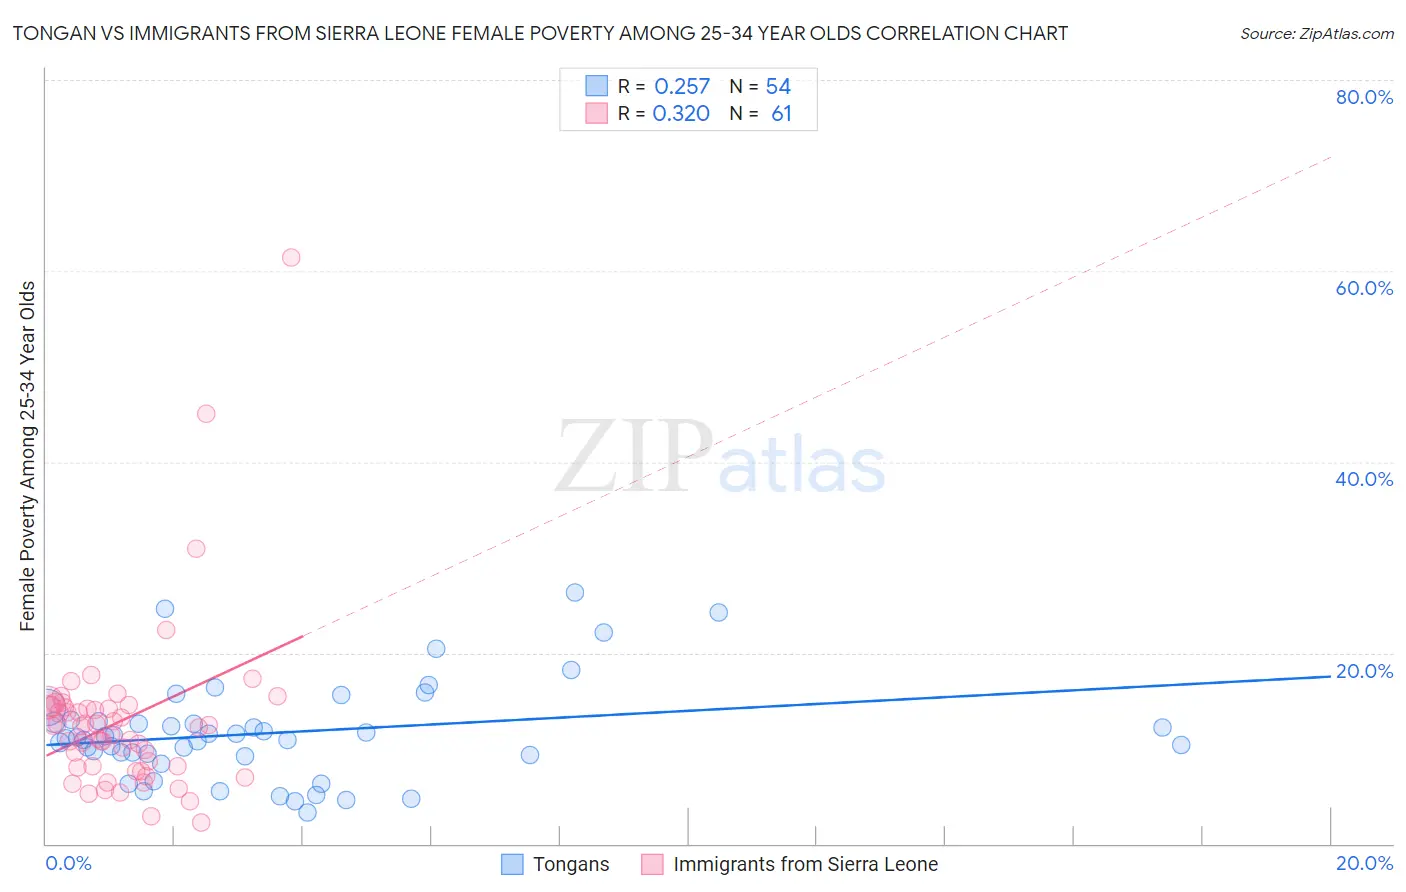 Tongan vs Immigrants from Sierra Leone Female Poverty Among 25-34 Year Olds